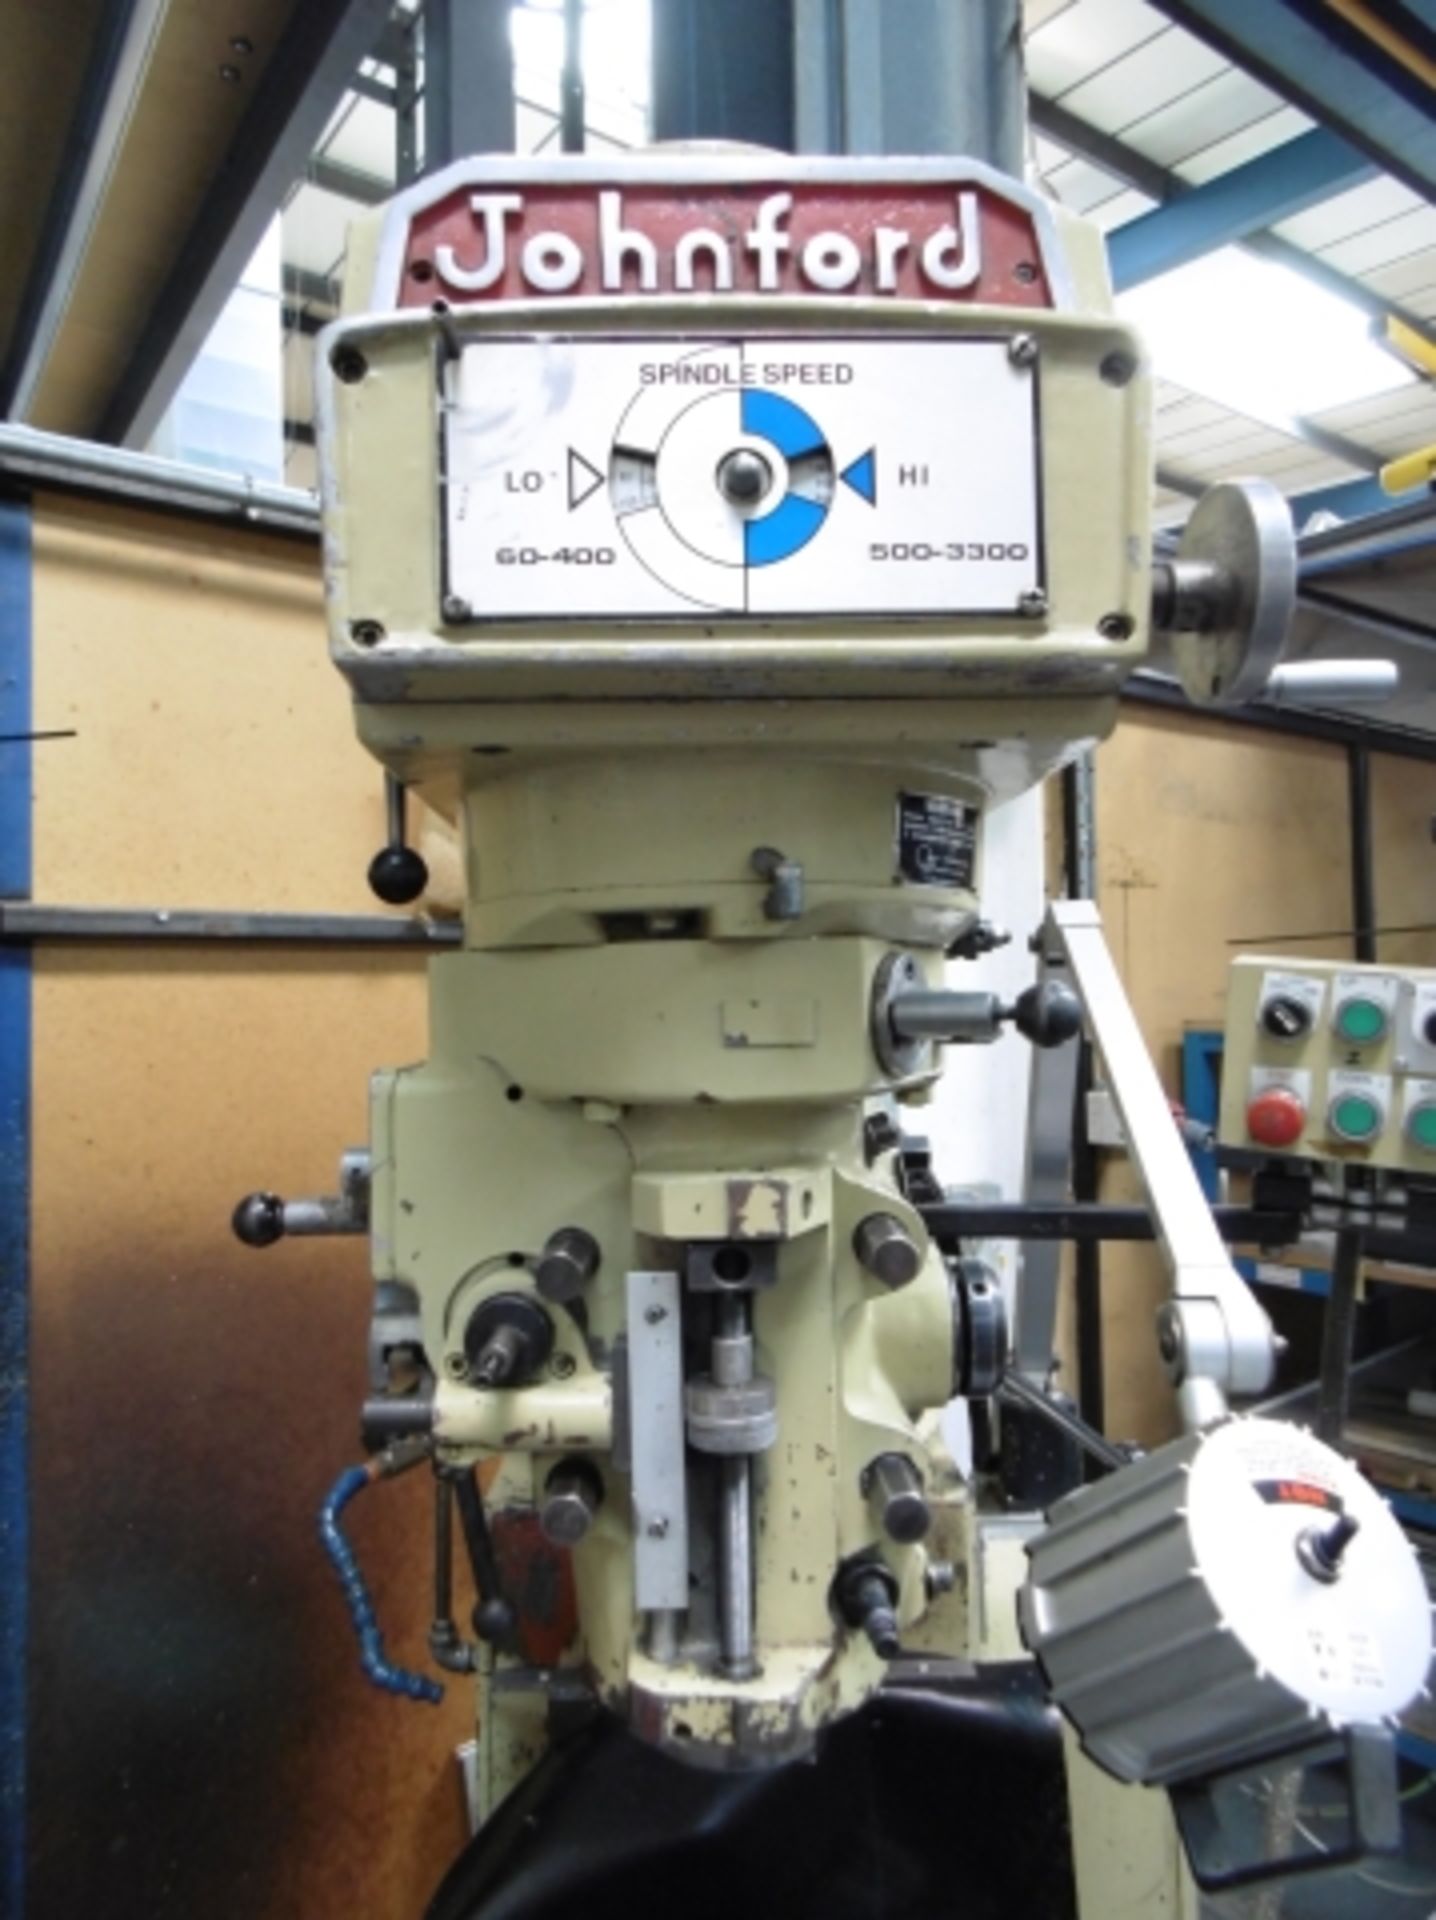 * 1989 Johnford model 4 AVS milling machine with rotating turret; spindle speed Lo= 60-400, Hi= - Image 2 of 15